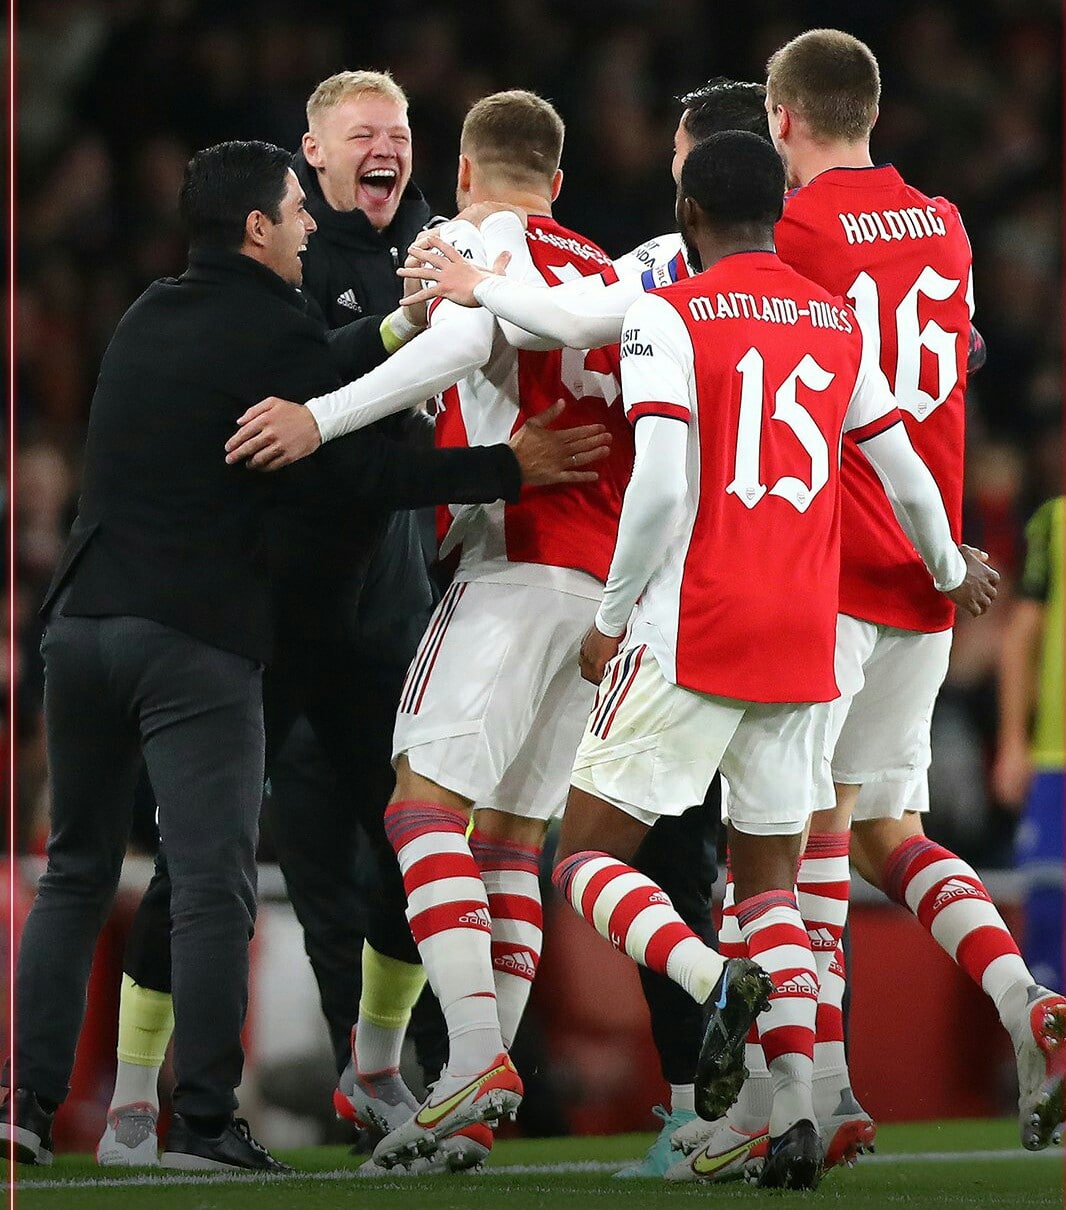 Carabao Cup: Arsenal, Chelsea Progress Into Q/finals After Wins Over Leeds, Southampton 